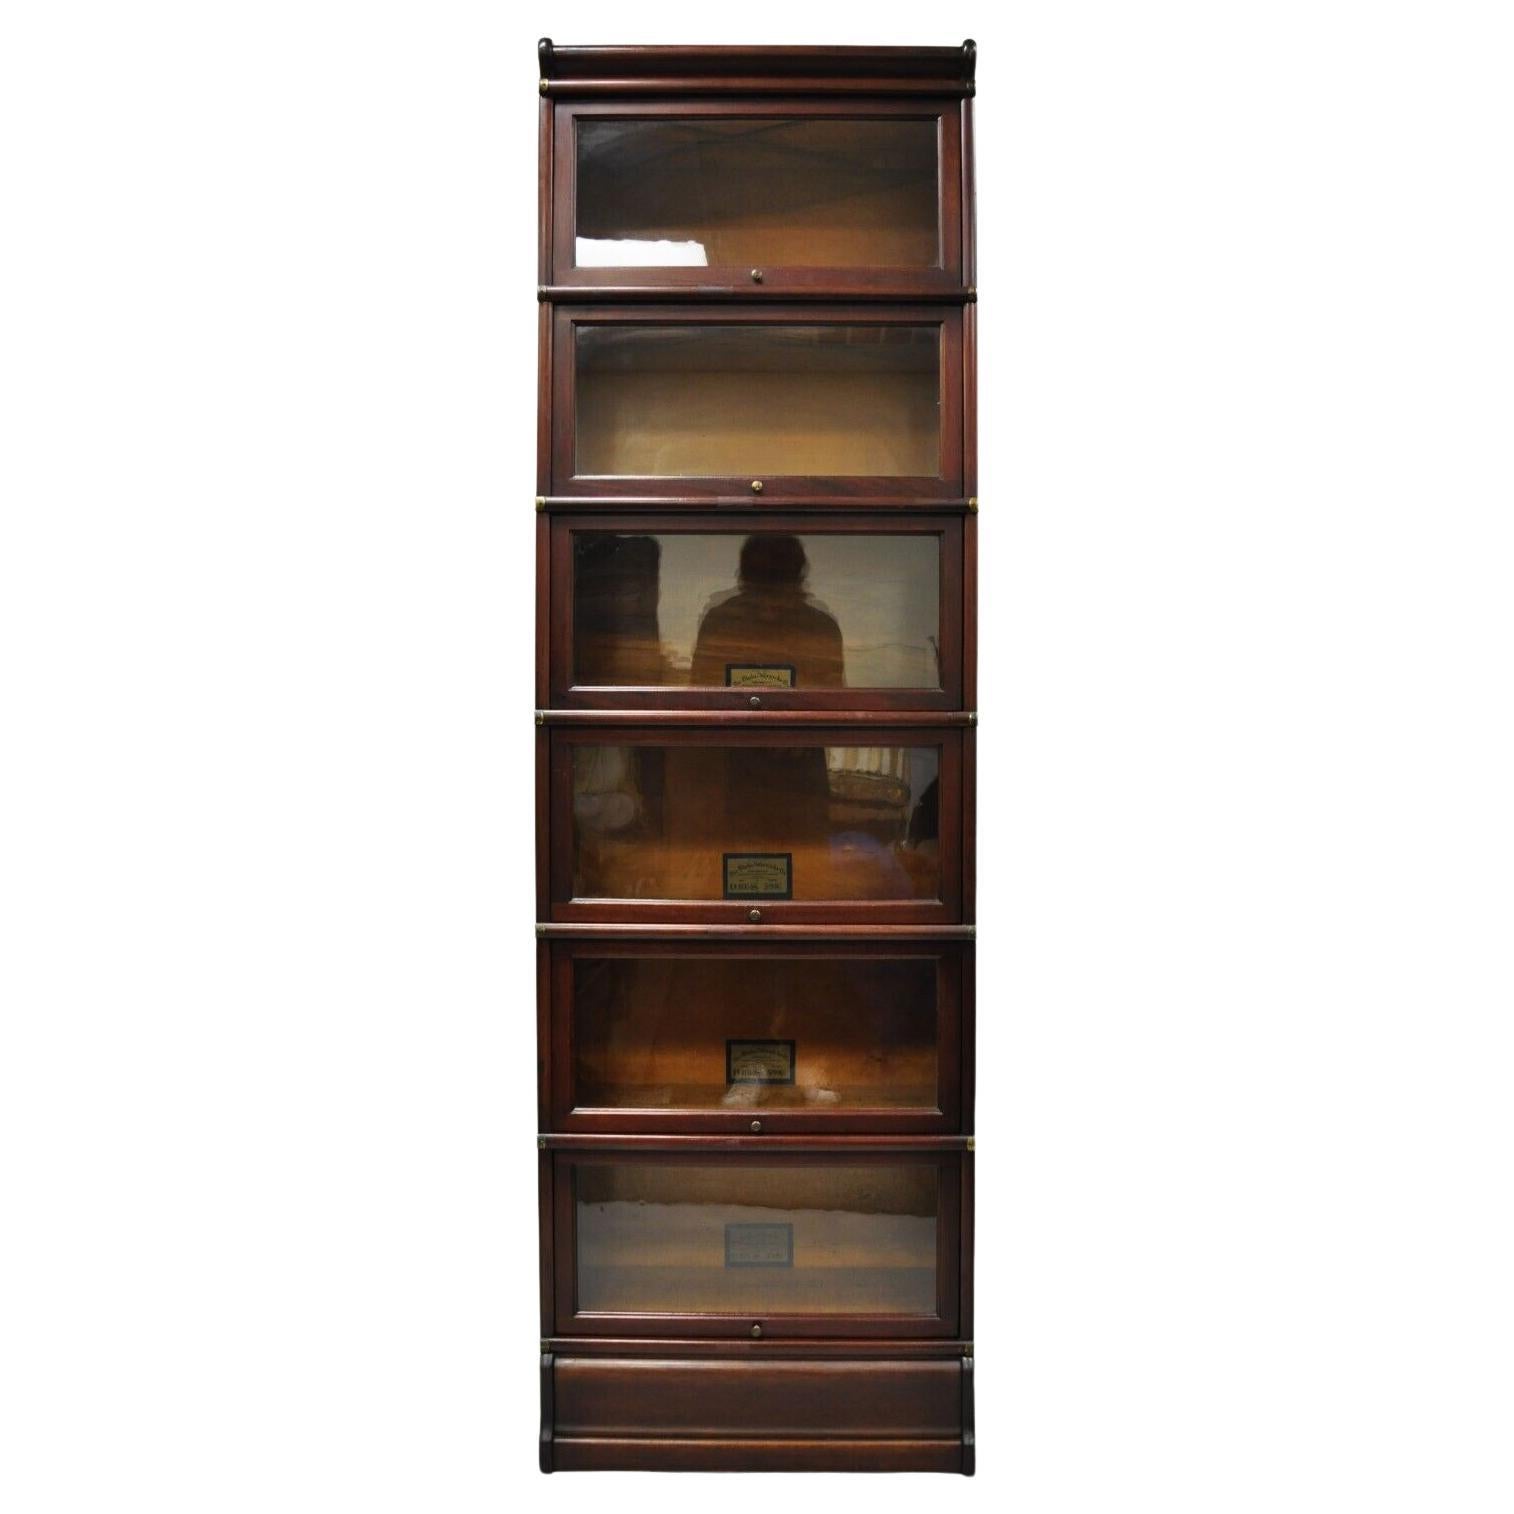 Globe Wernicke D10 1/4 S 598 1/2 Mahogany 6 Section Barrister Lawyers Bookcase